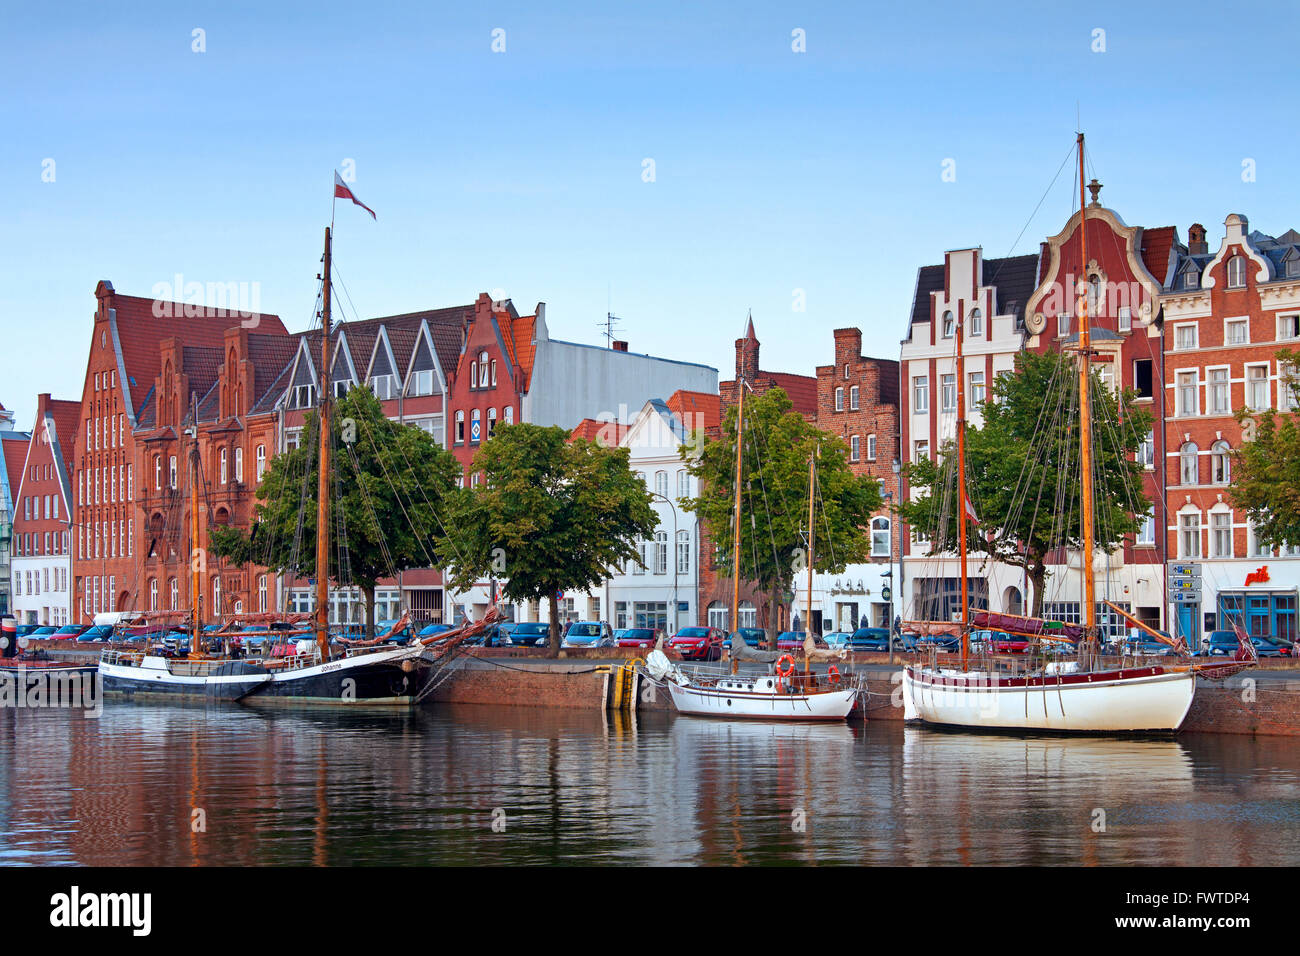 Museums harbour with traditional sailing ships berthed at the Untertrave in the Hanseatic town Lübeck, Germany Stock Photo